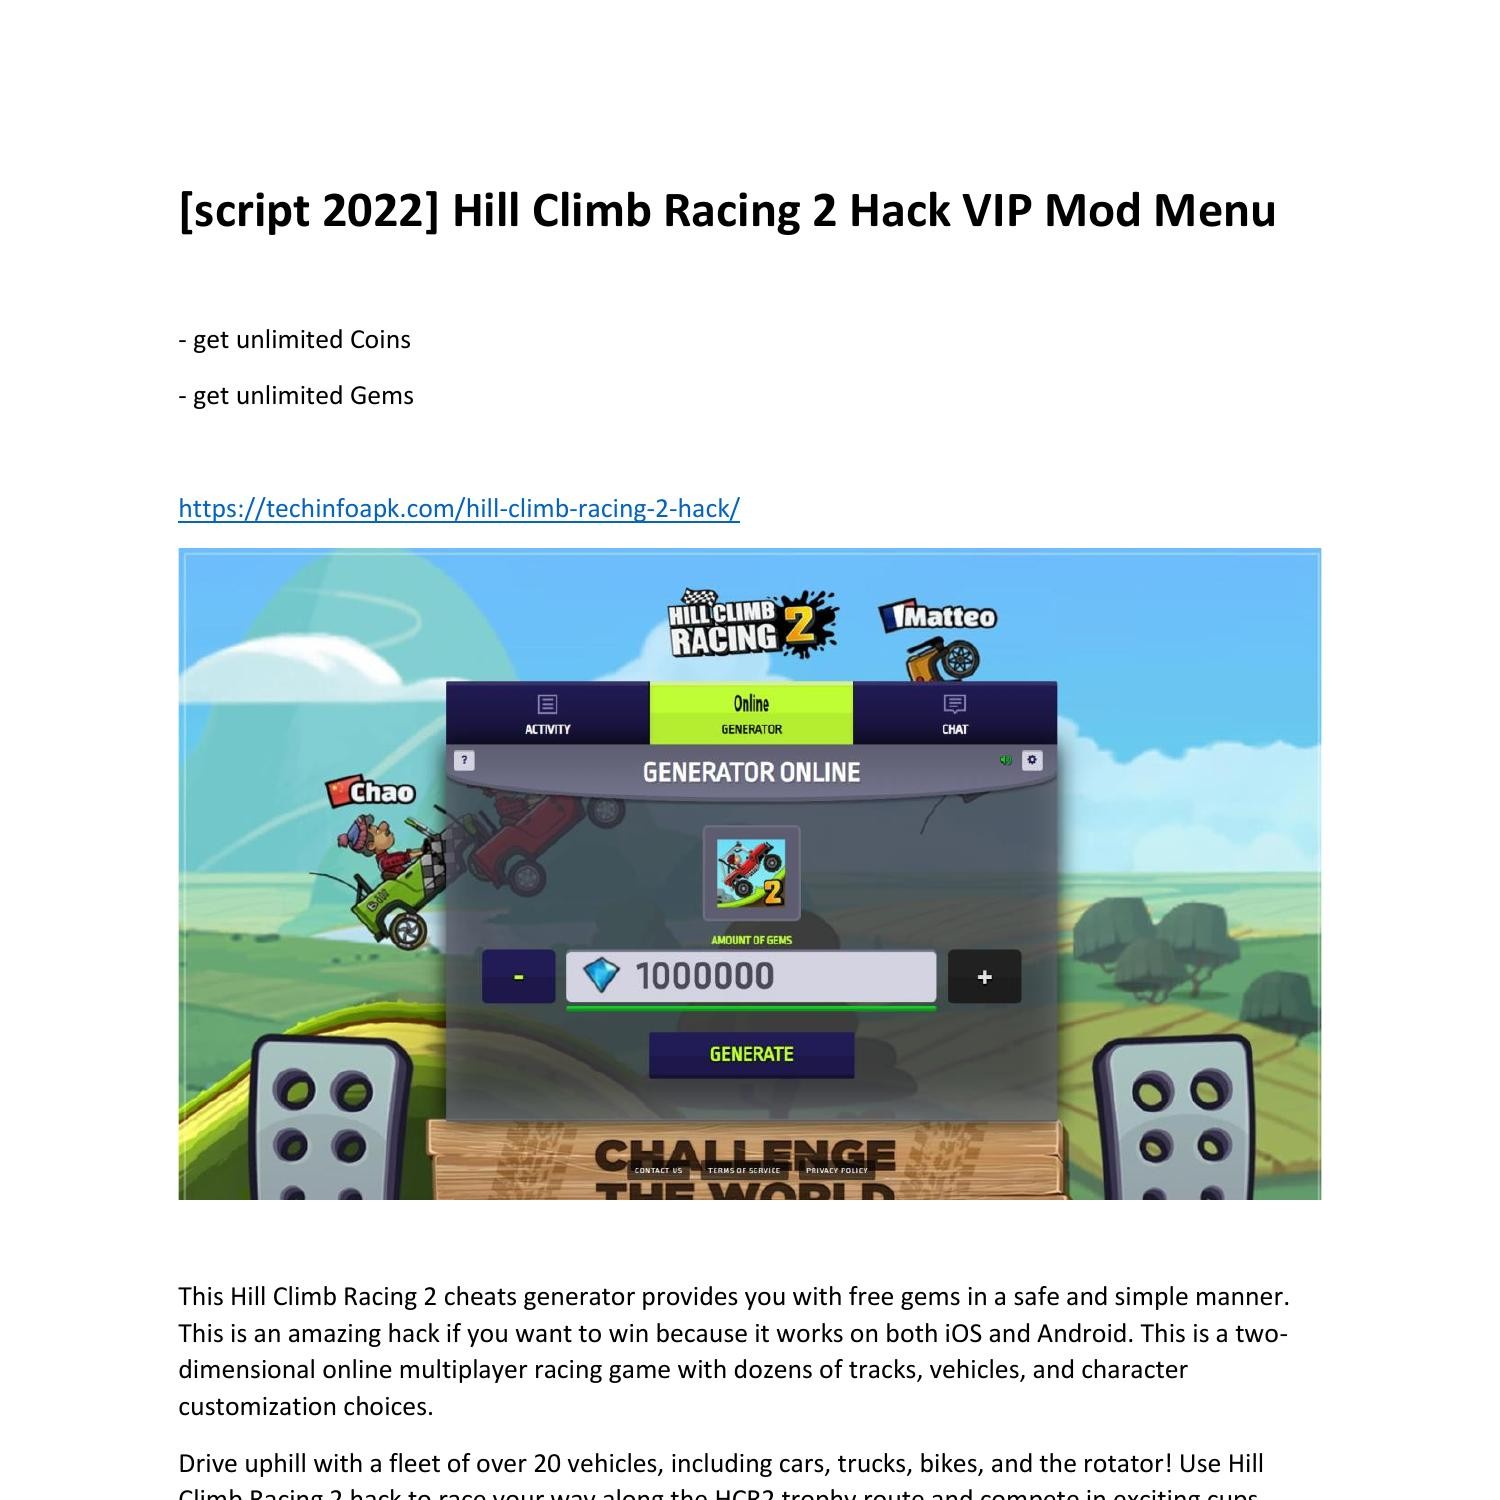 Hill Climb Racing 2 [Chestbox/Coins/Gems] hack script by MonkeyGuy001 - LUA  scripts - GameGuardian